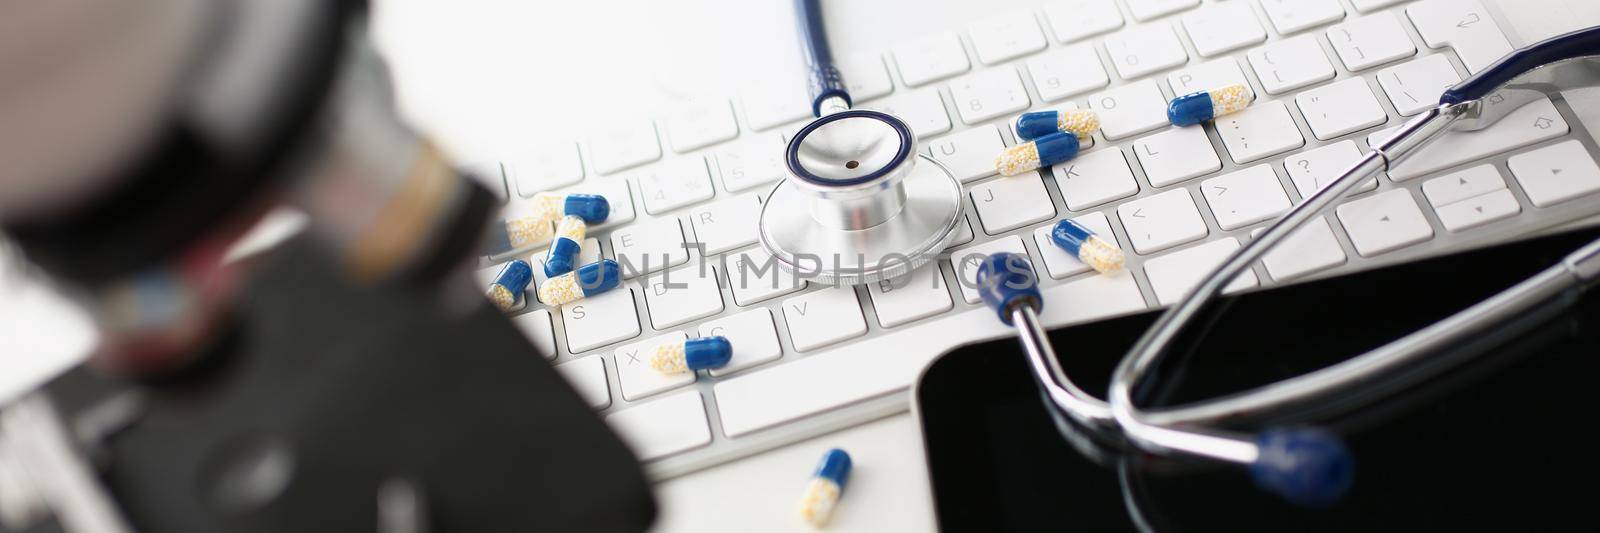 On the keyboard are capsules and a stethoscope, a workstation for a consultant doctor. Online medicine, consultation and analysis